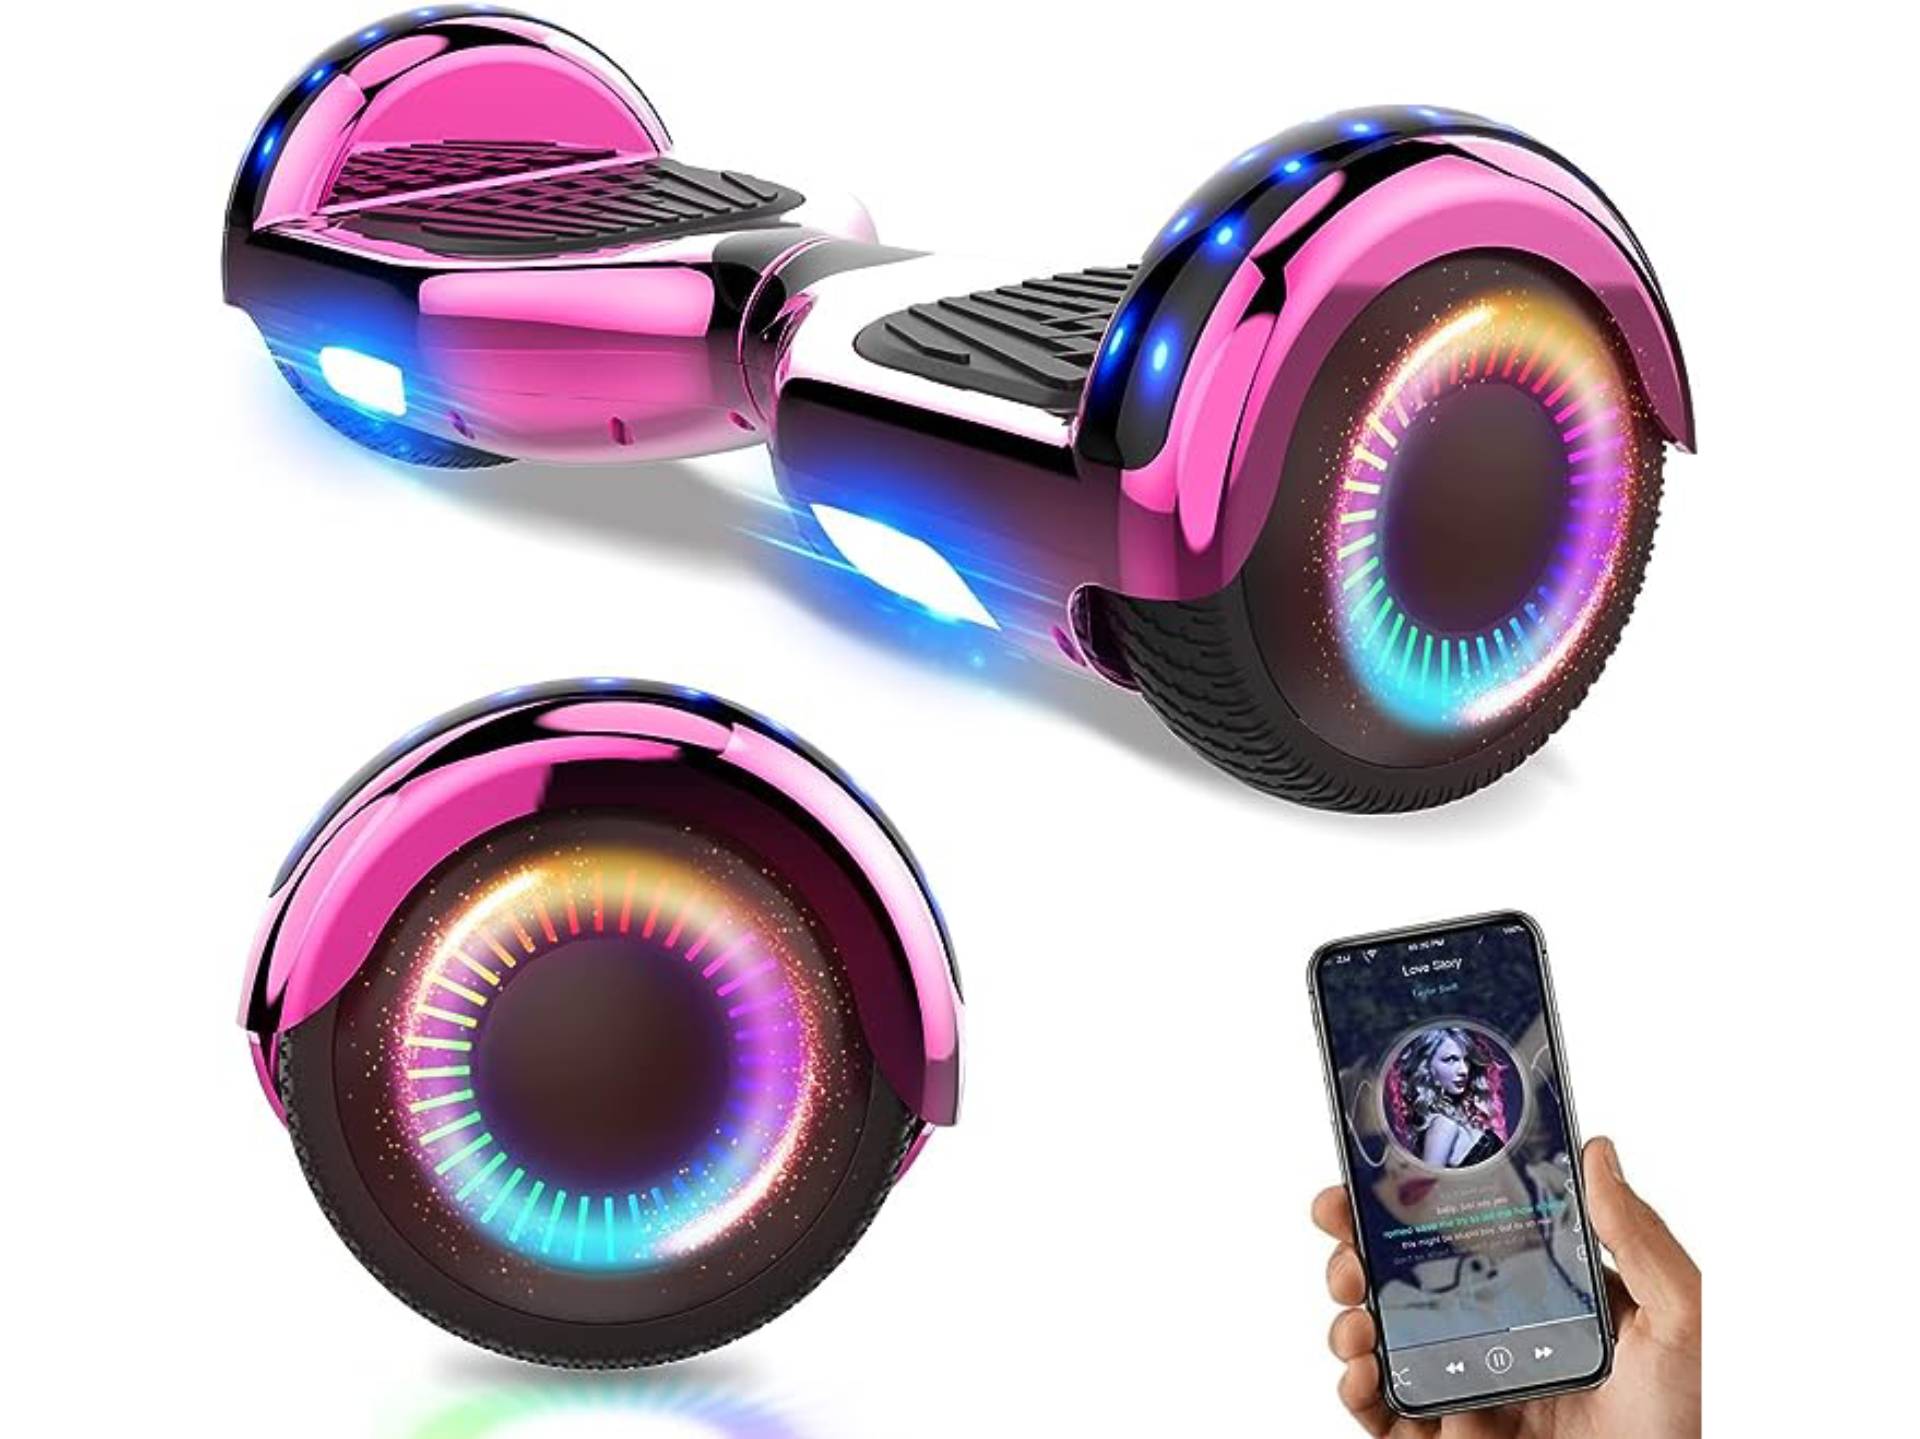 Amazon shoppers rush to buy ‘easy to ride’ £140 hoverboard appearing in basket for £109